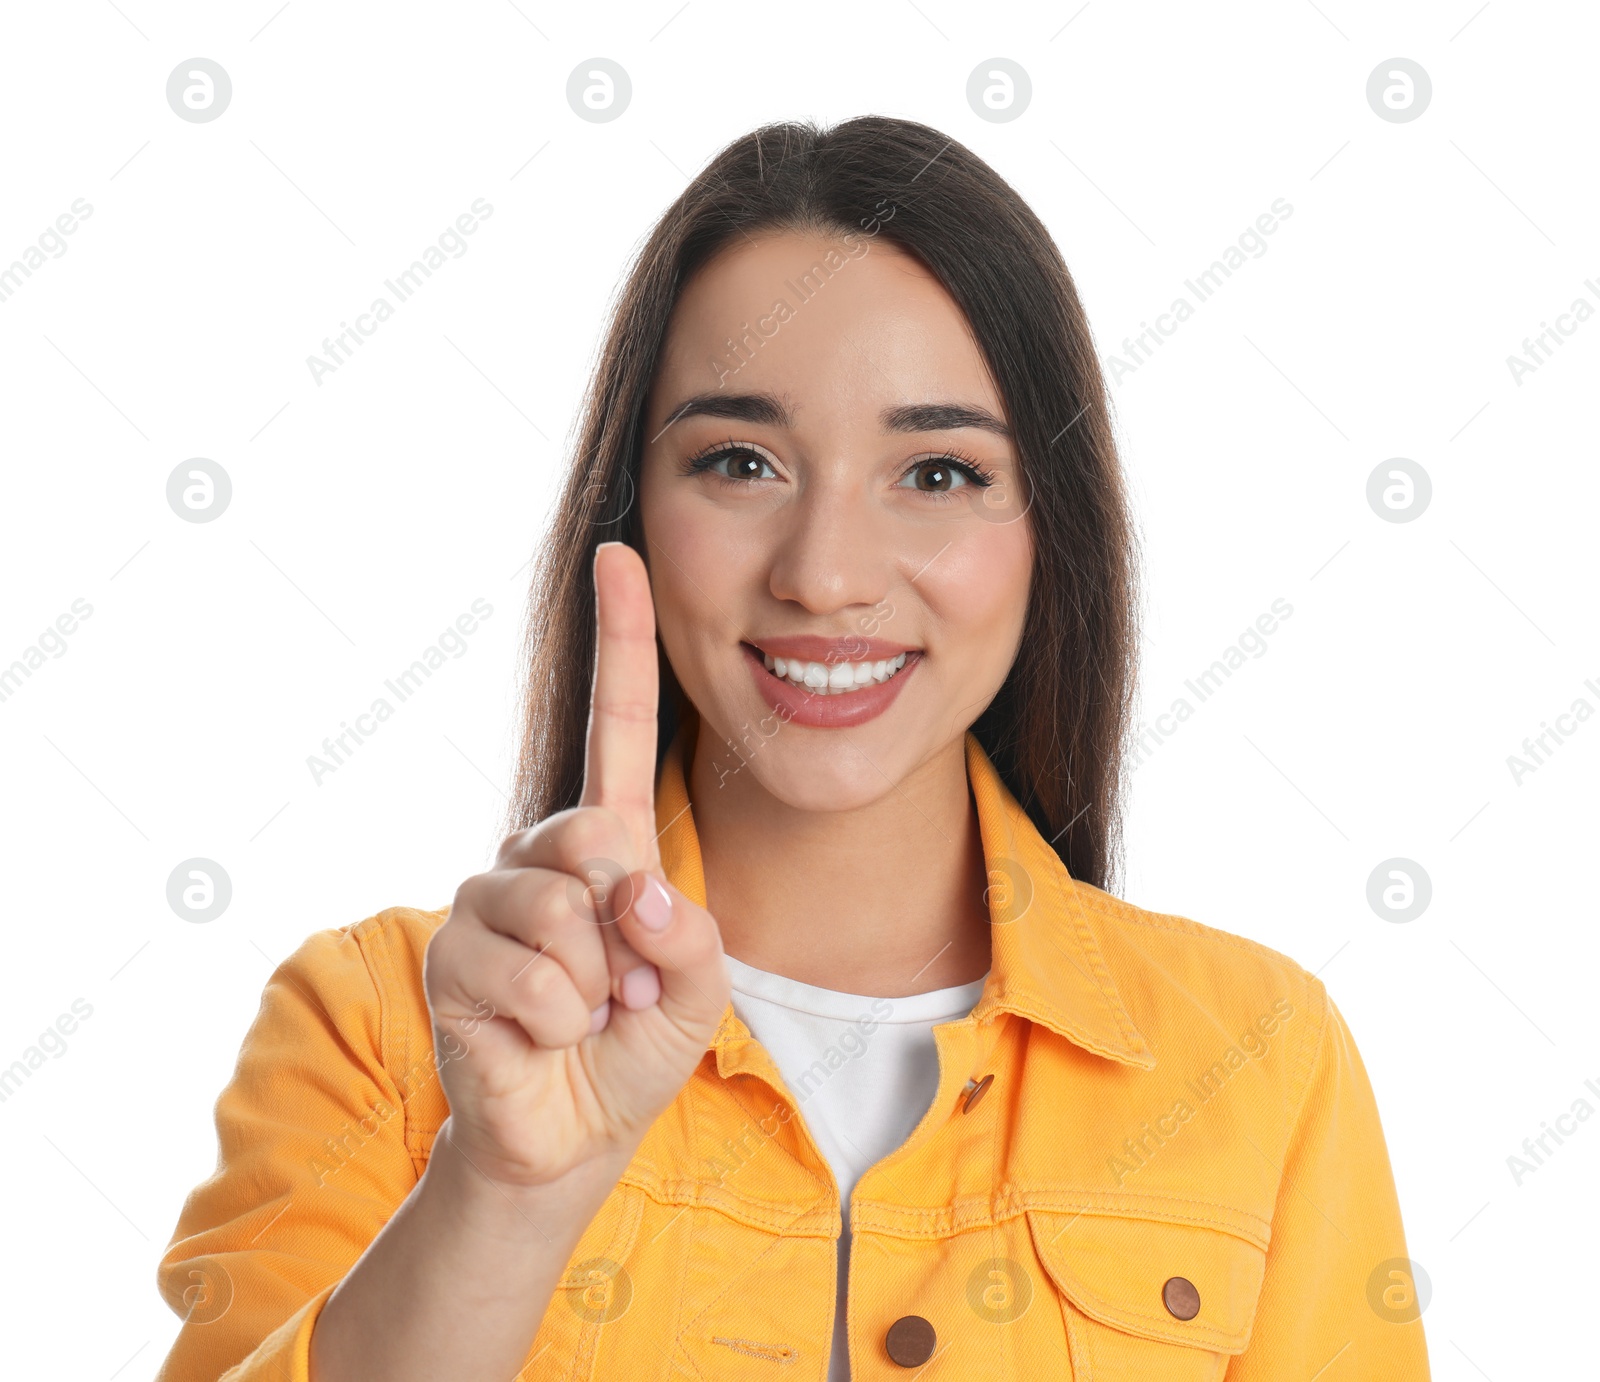 Photo of Woman in yellow jacket showing number one with her hand on white background